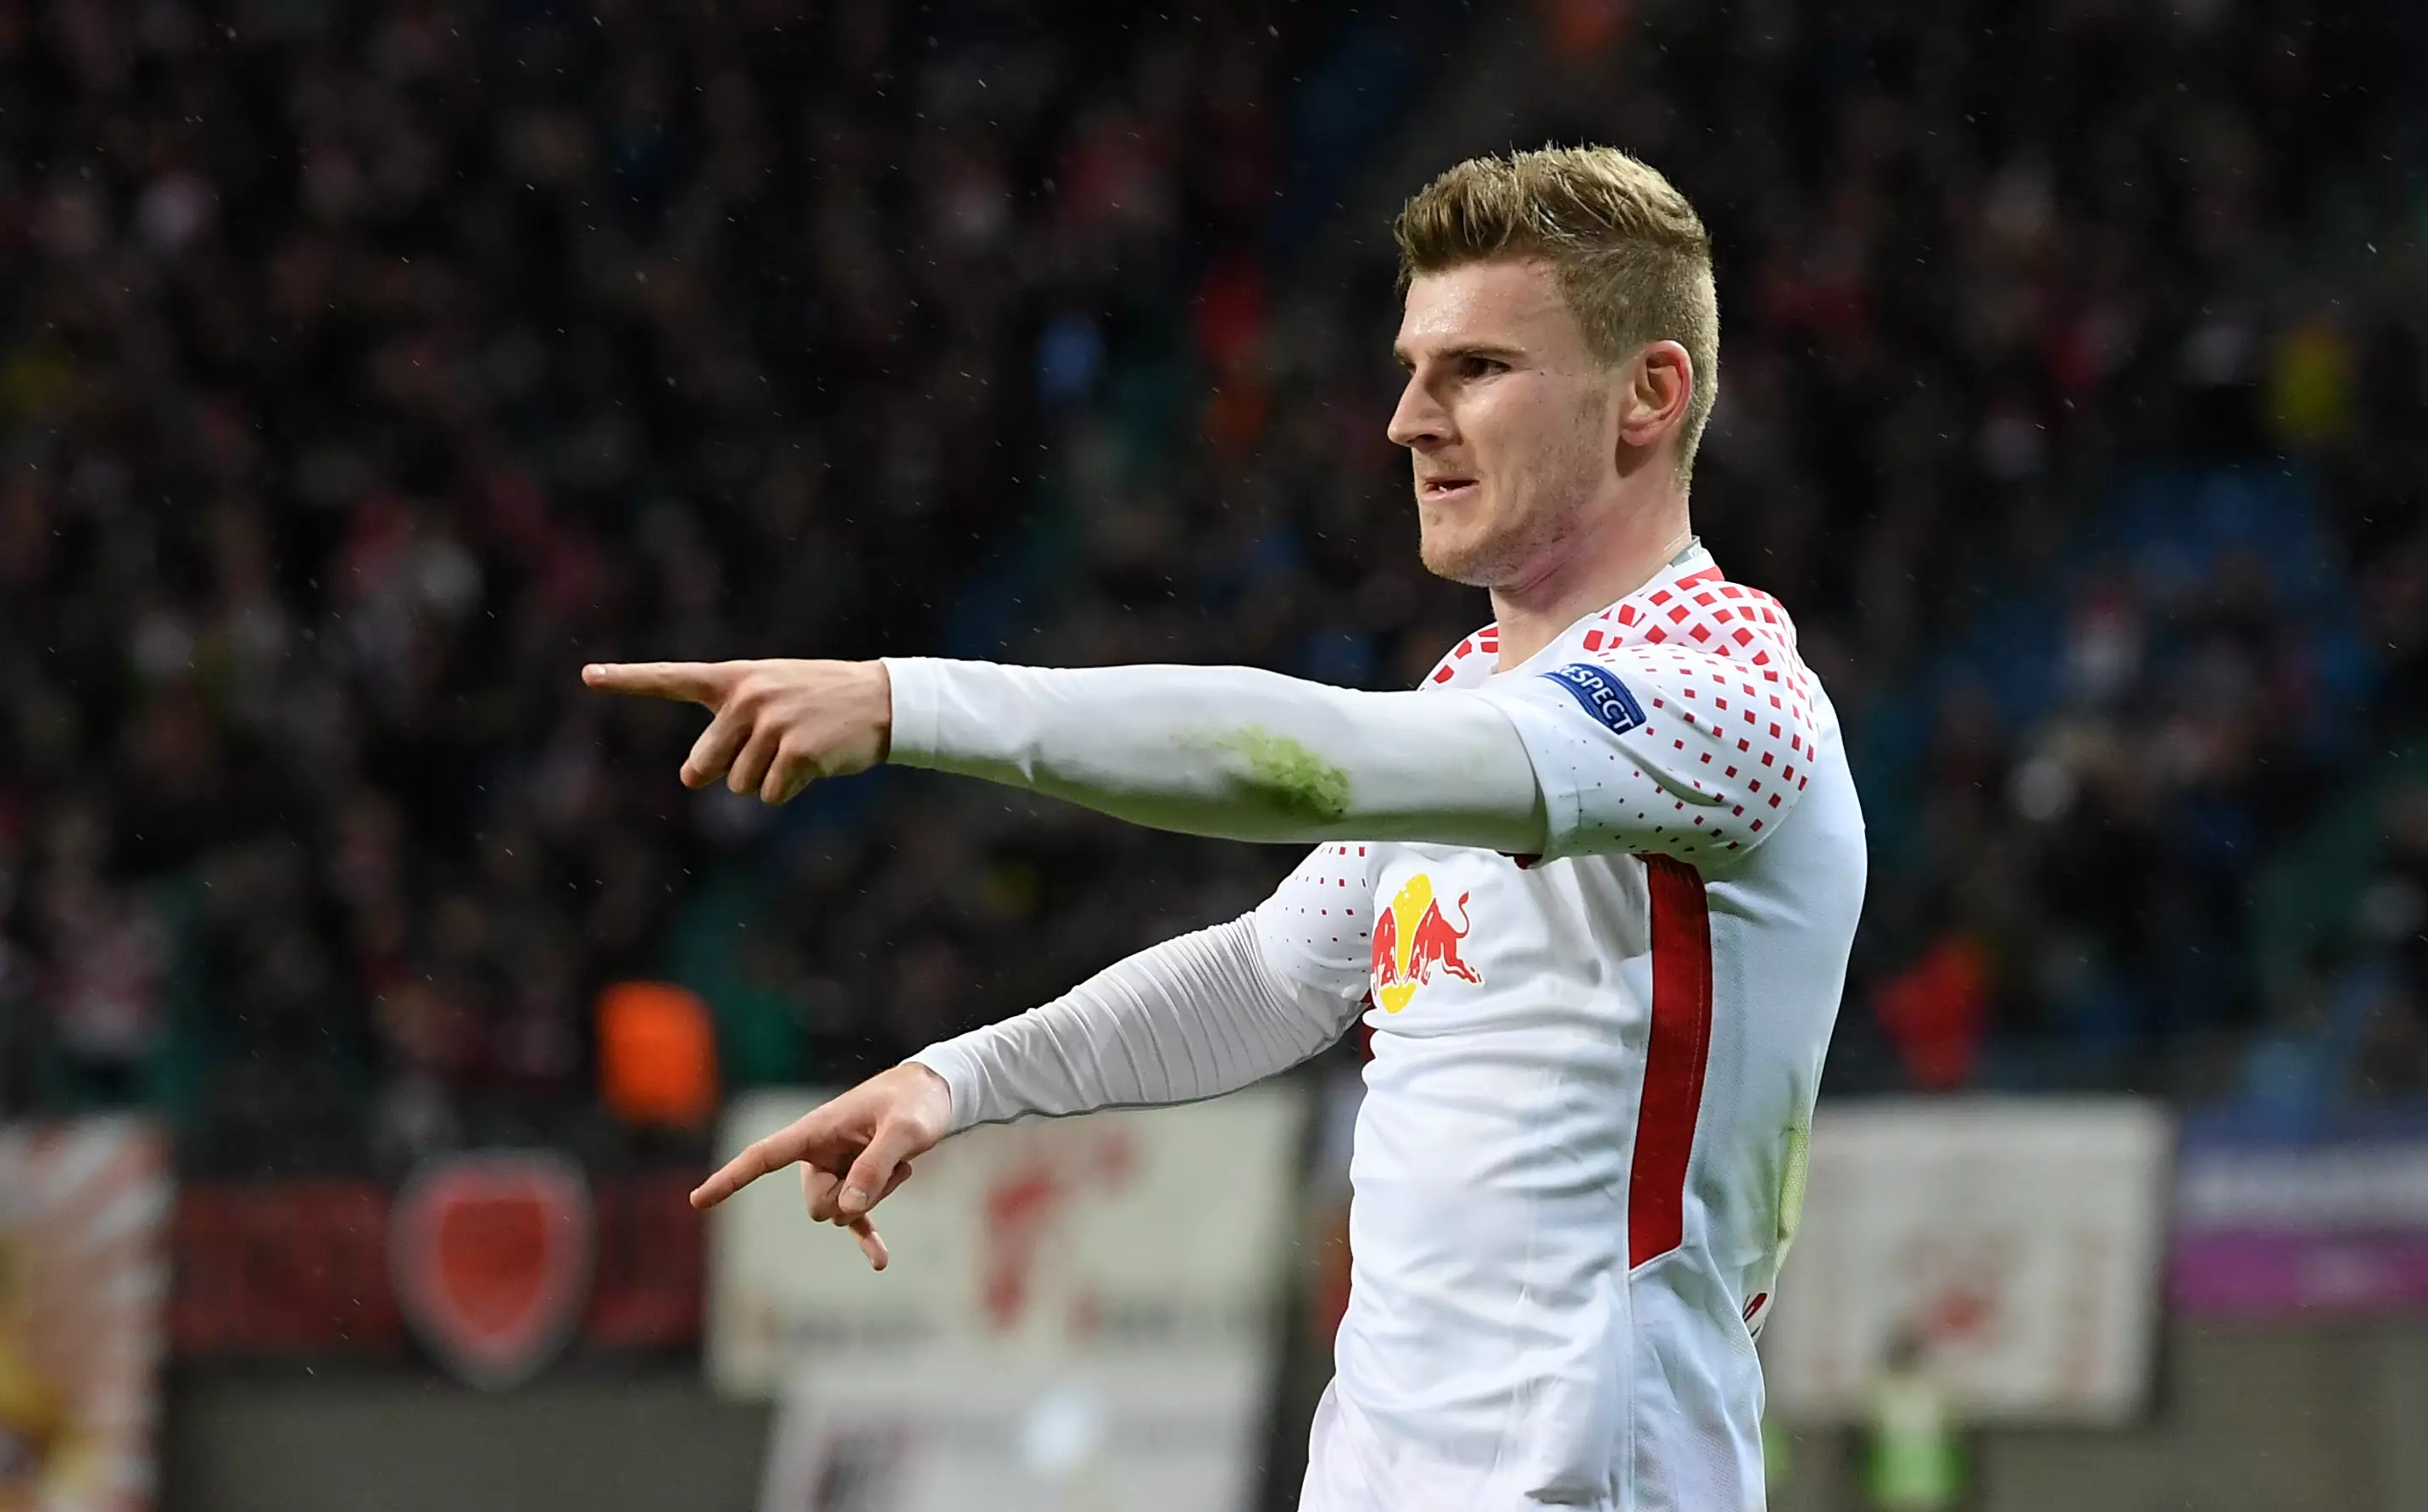 Werner scored 21 goals in his first season with Leipzig. Image: PA Images